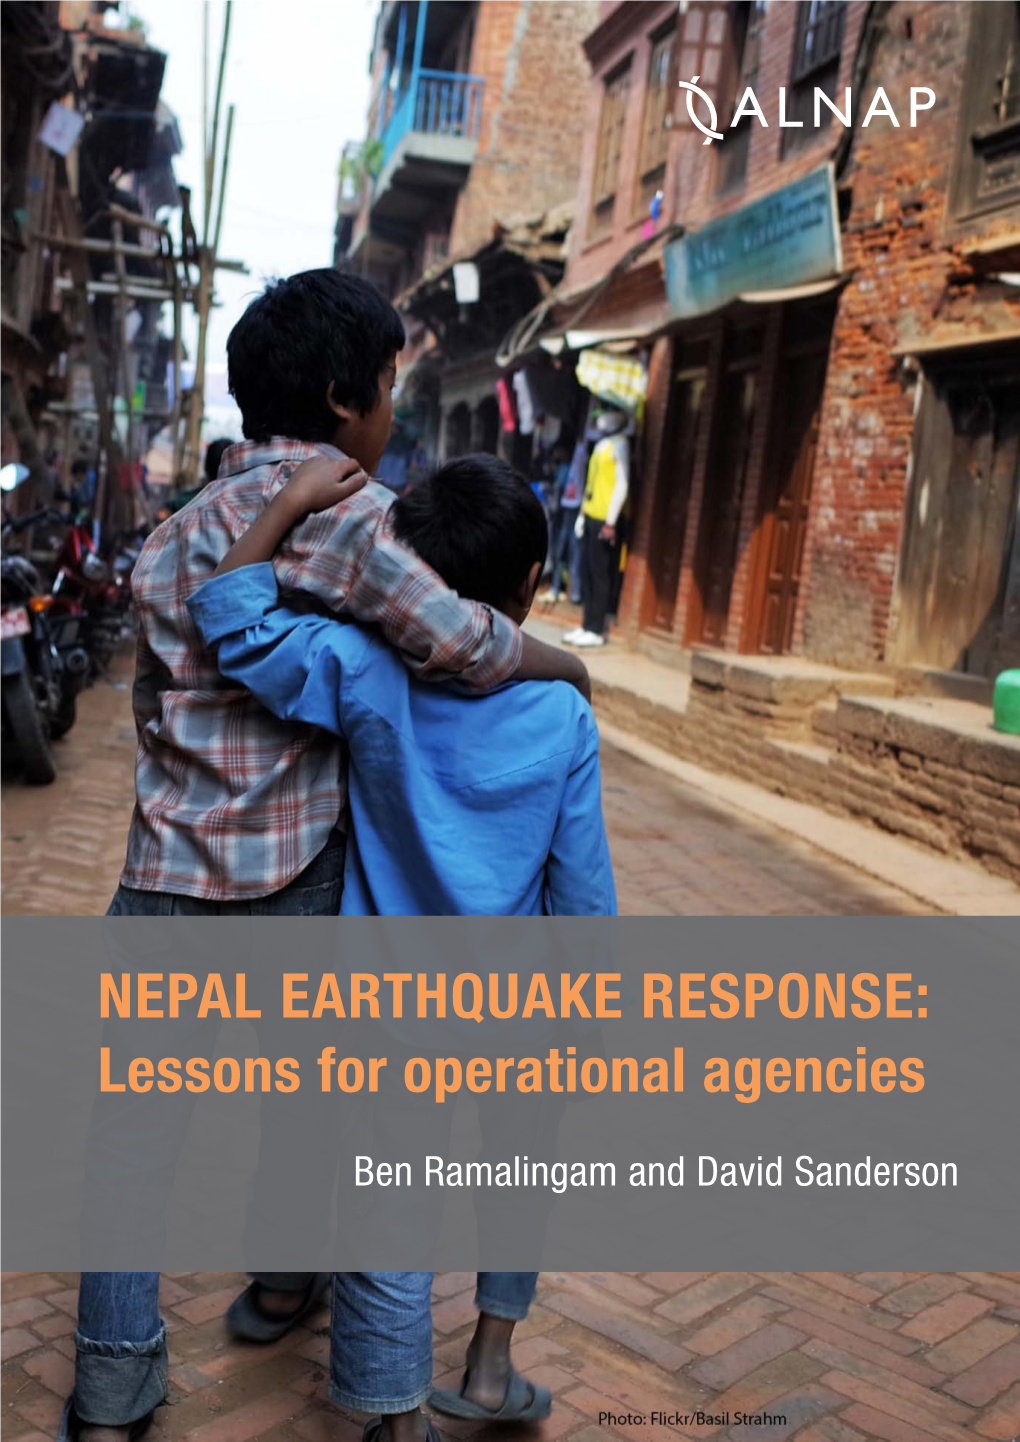 NEPAL EARTHQUAKE RESPONSE: Lessons for Operational Agencies